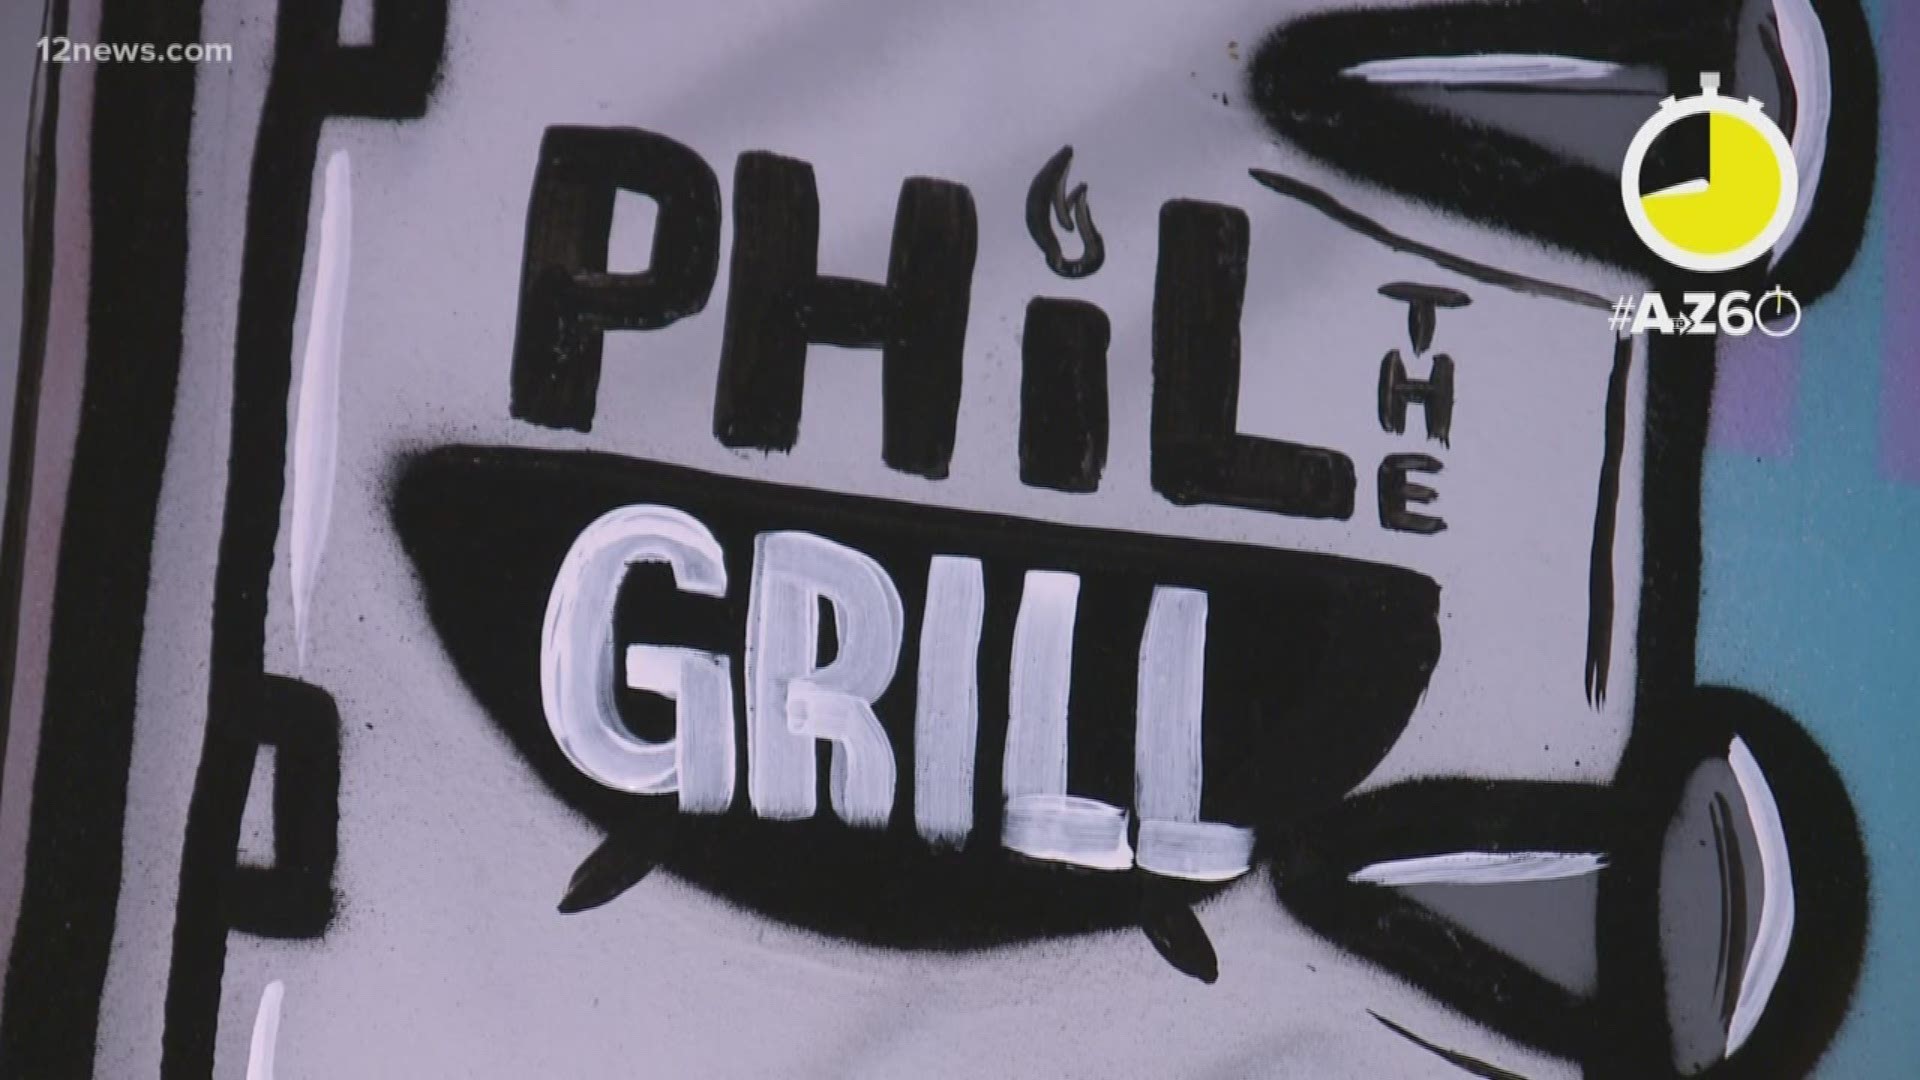 Mitch Carr chats with "Phil the Grill" to talk barbeque. Learn more about the Trapp Haus in the Valley.